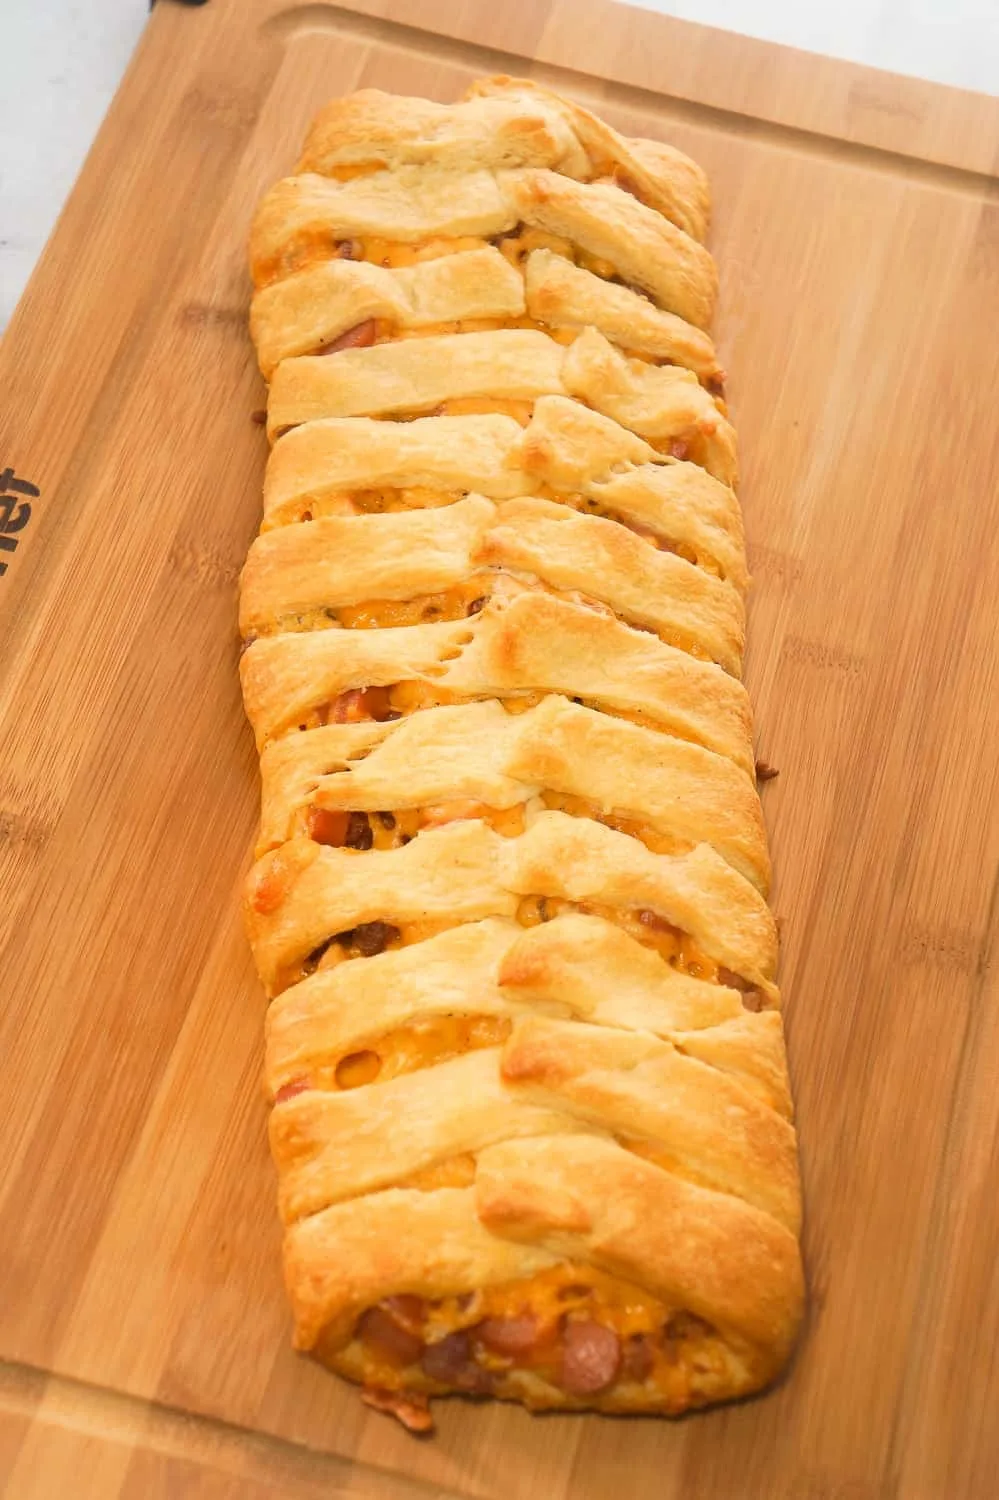 Bacon Cheese Dog Crescent Braid is an easy weeknight dinner recipe. This crescent bake is stuffed with wieners, bacon and cheese then topped with chili to make it a hearty comfort food dish.